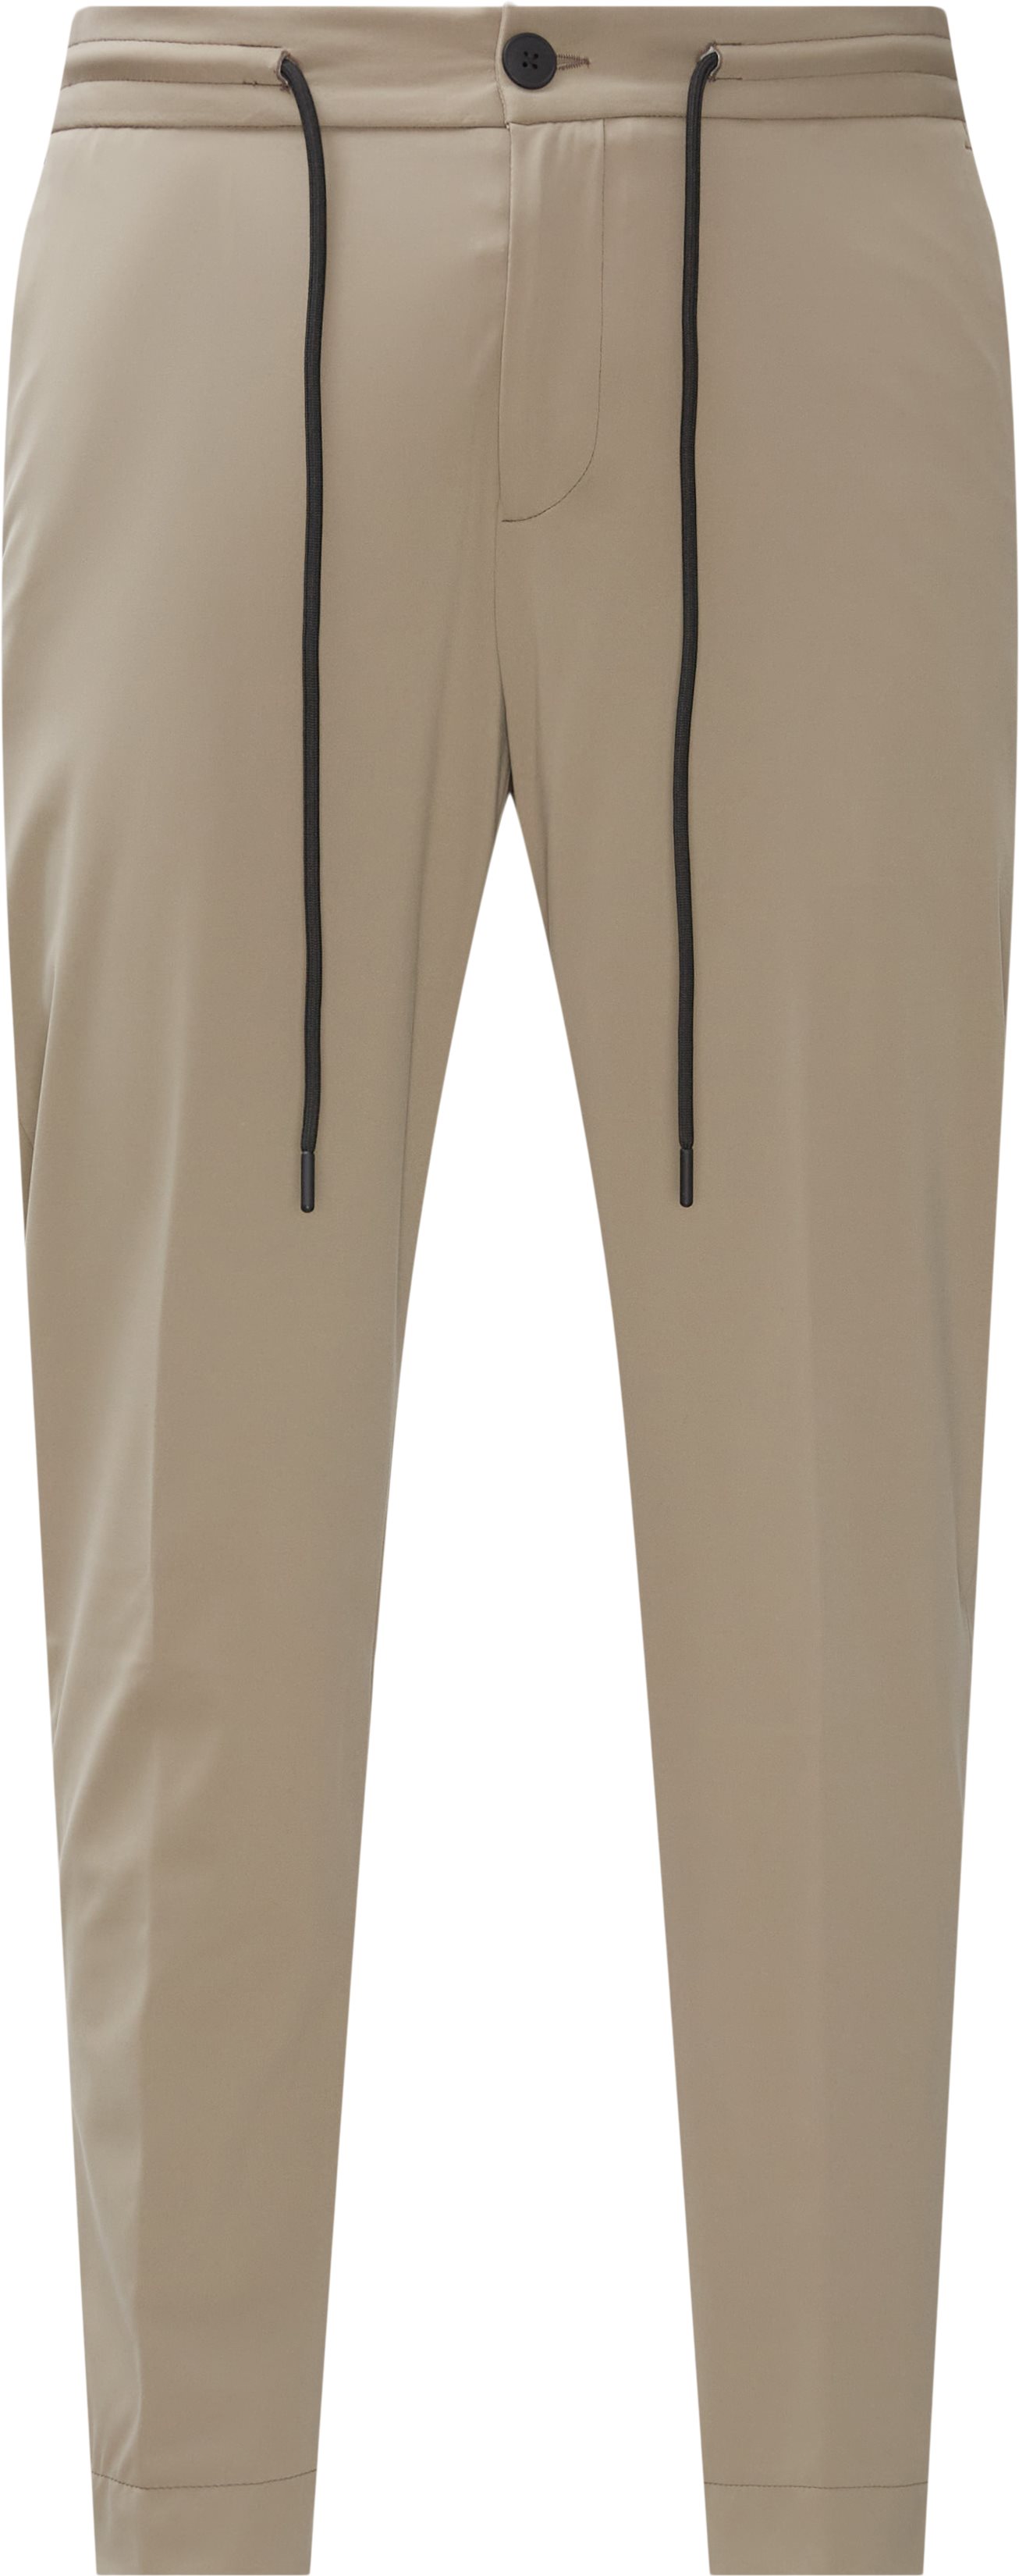 Casual Stretch Pants - Bukser - Sand